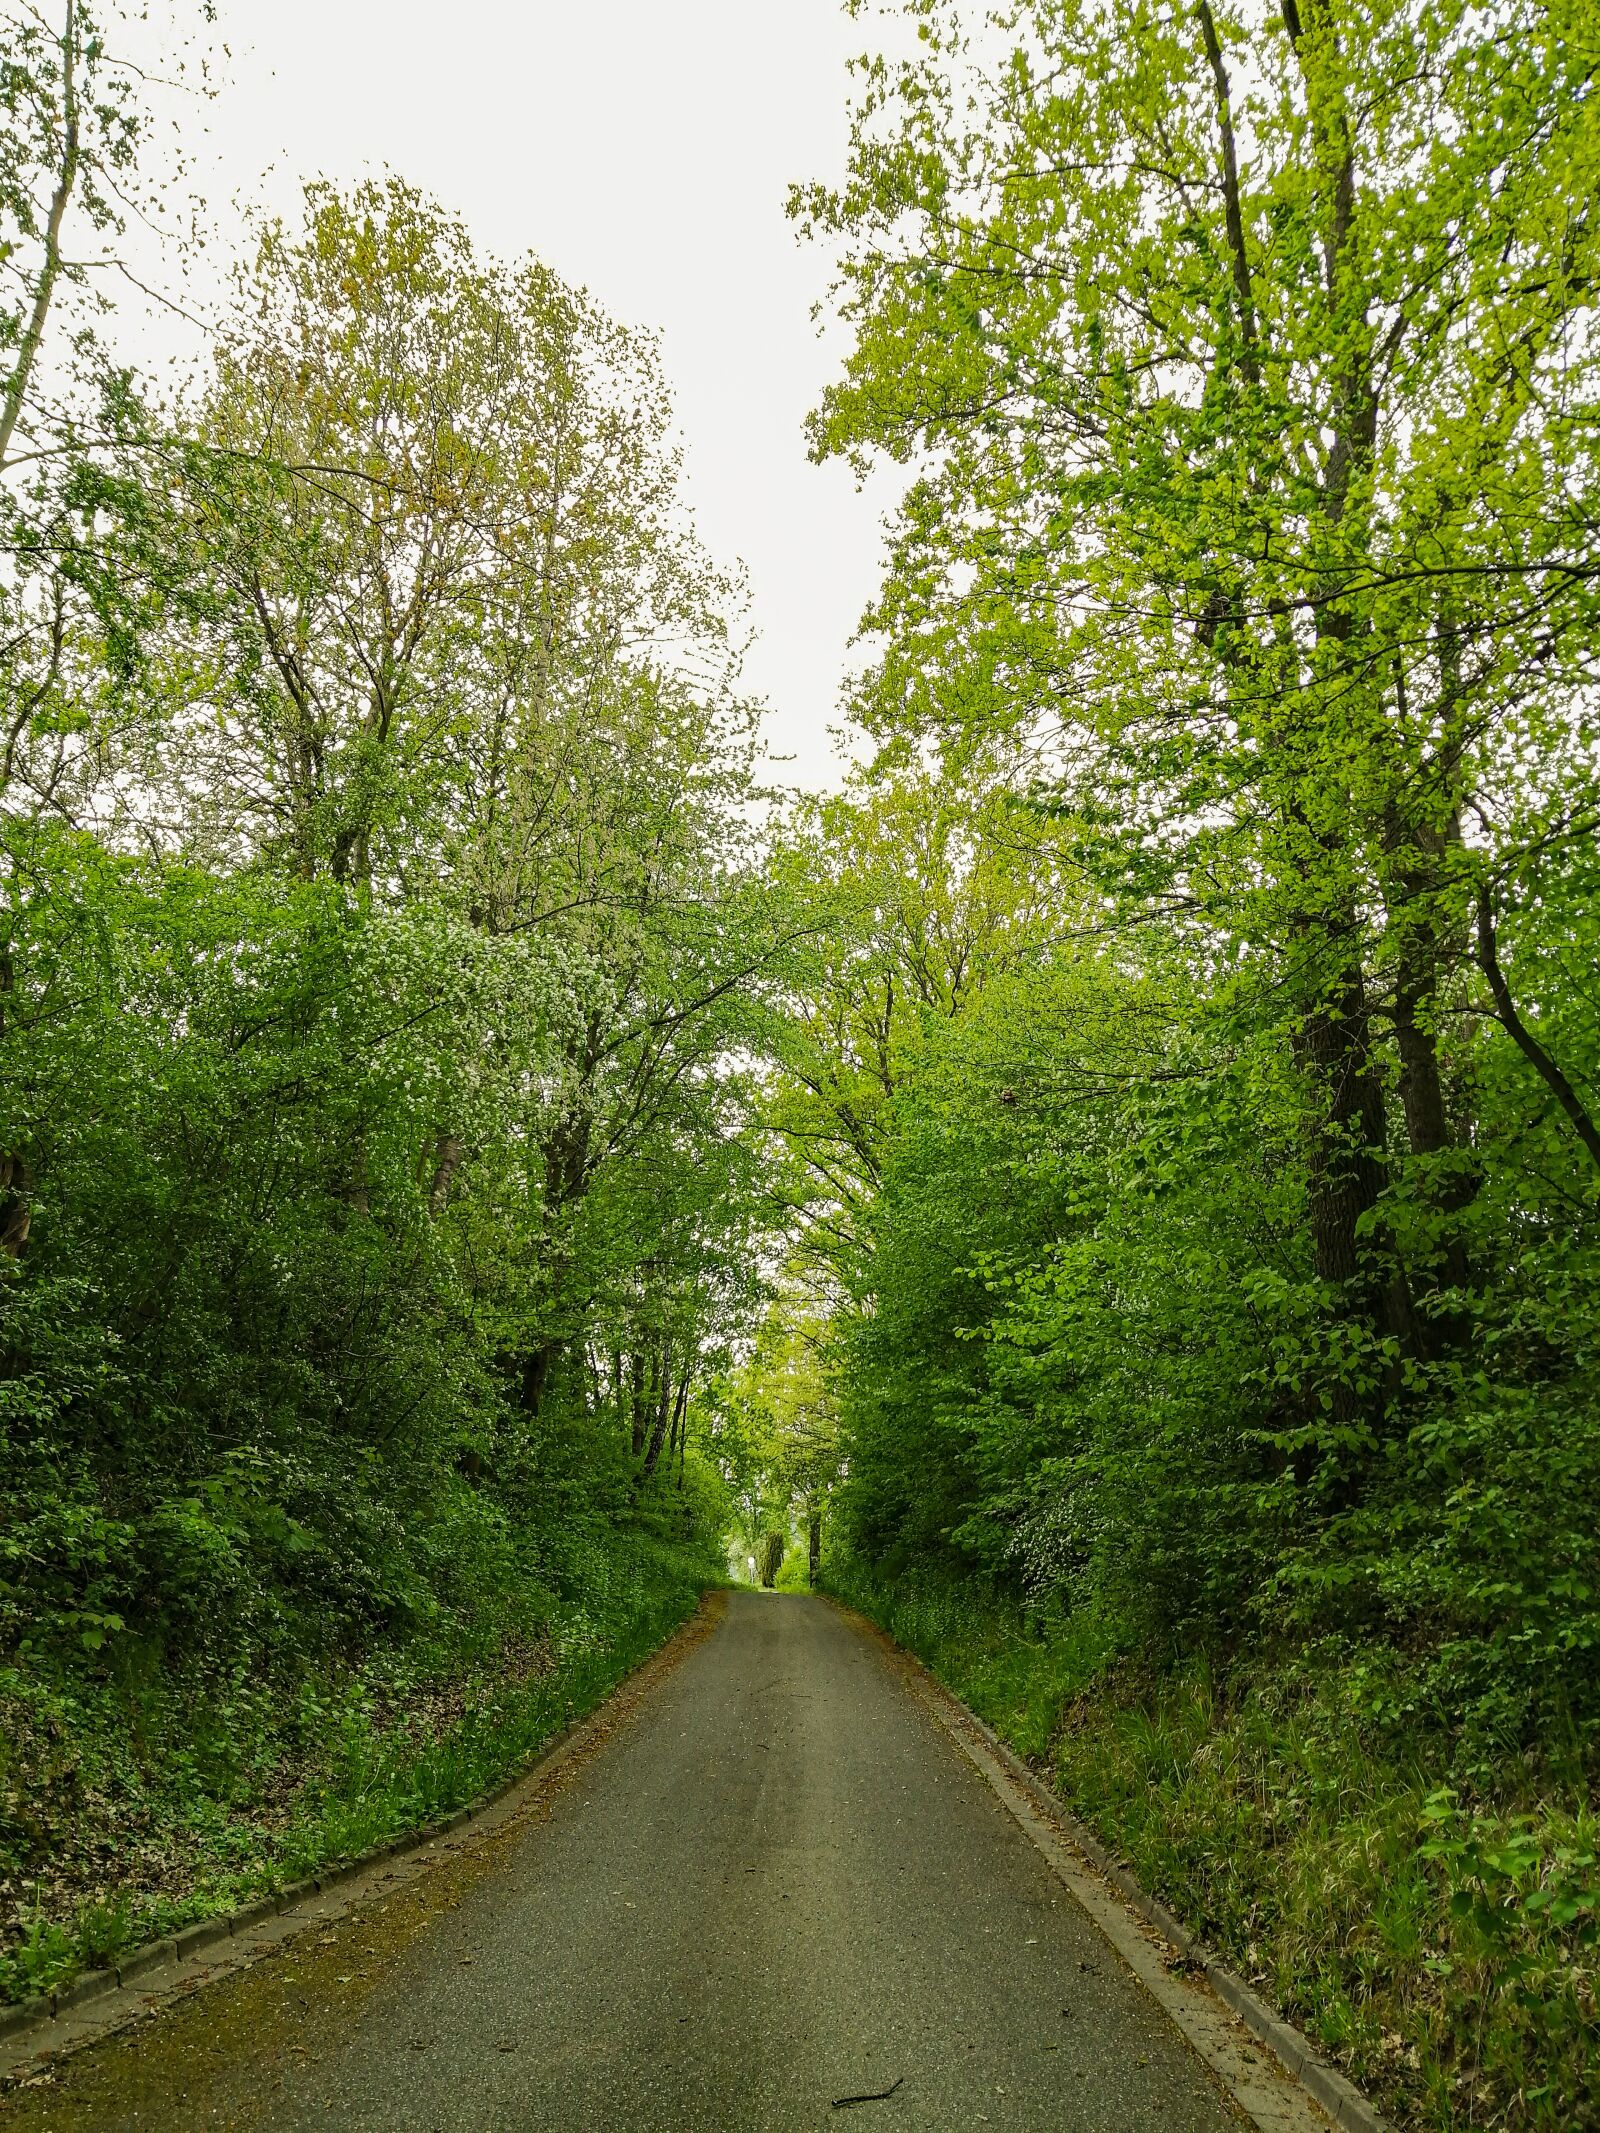 HUAWEI JSN-L21 sample photo. Road, forest, trees photography